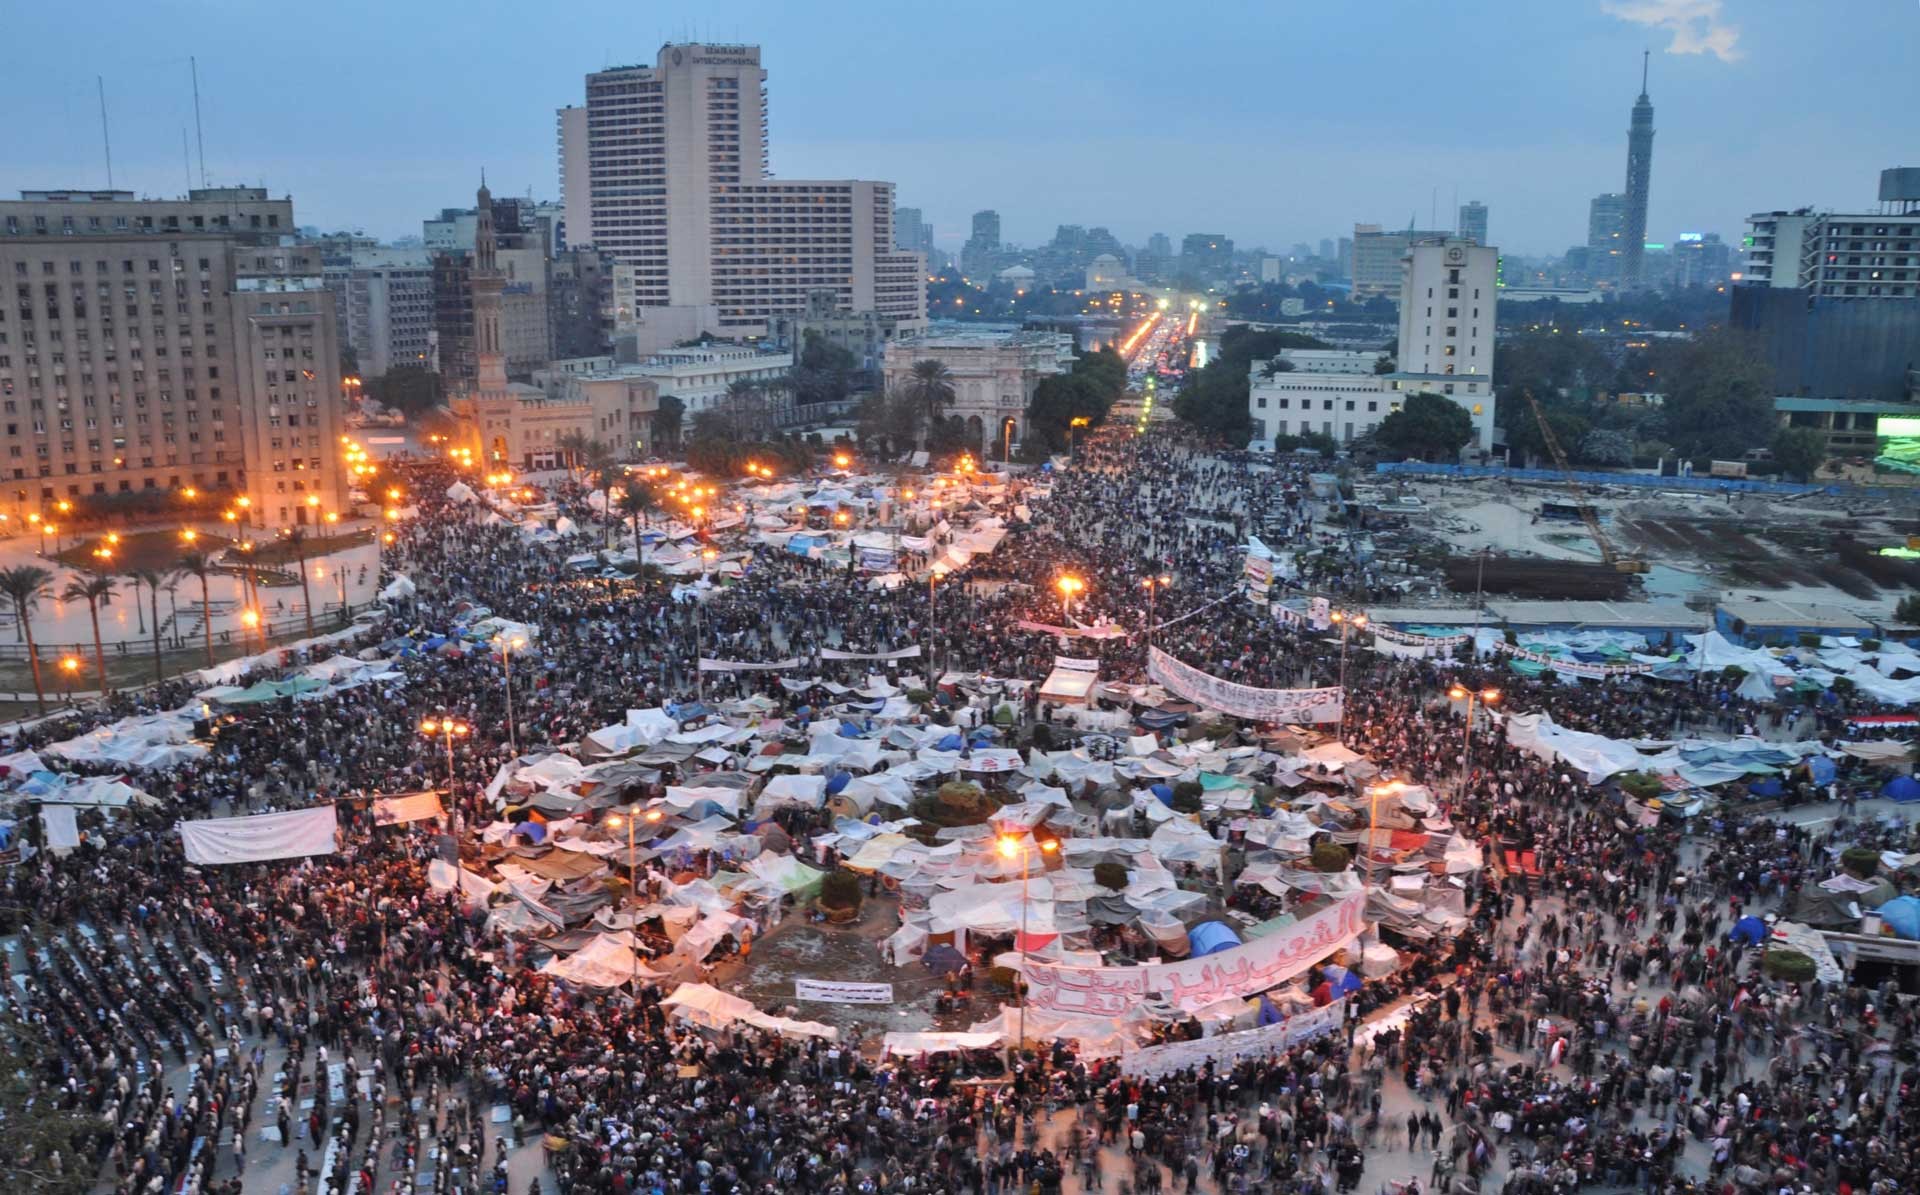 From 2011 to 2013 the traffic circle in the centre of Cairo that is otherwise full of cars was repeatedly transformed into a site of mass protests.